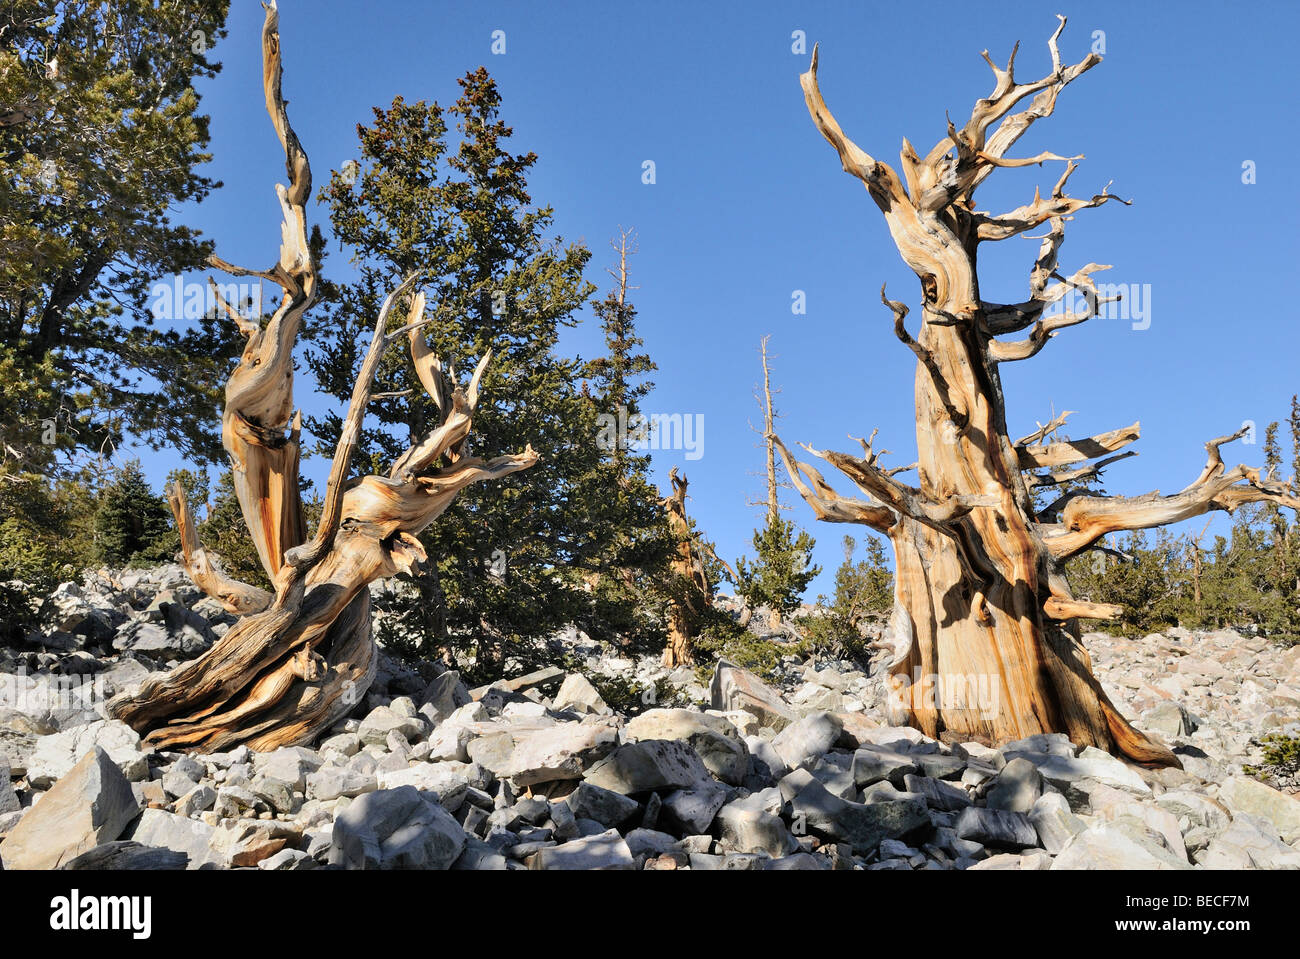 Bristlecone Pines (Pinus aristata), between 2000 and 3000 years old, Bristlecone Pine Grove, Great Basin National Park, Nevada, Stock Photo